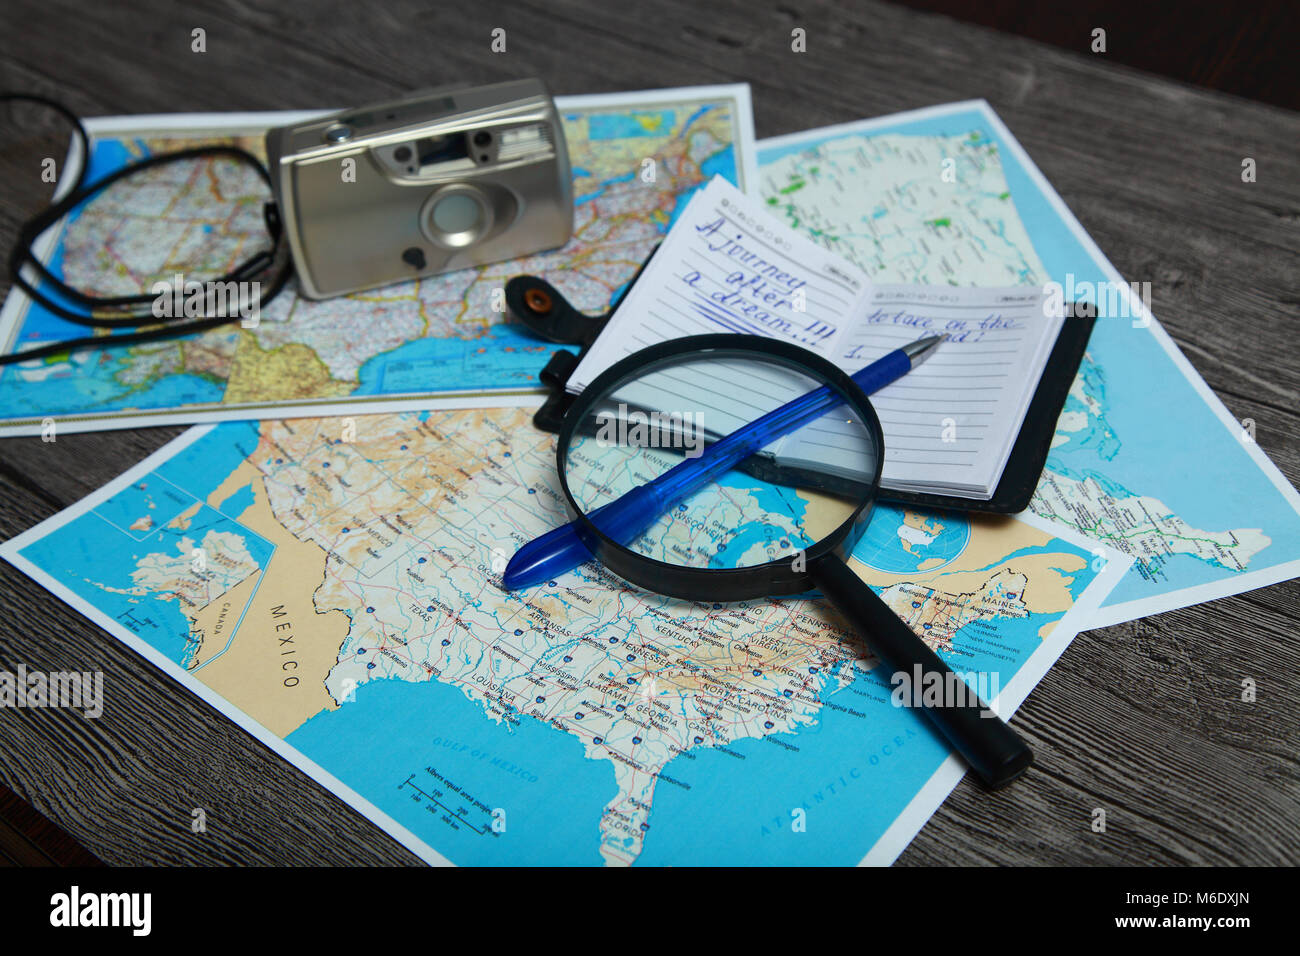 A person is preparing to travel. On the table are atlases of the United States. At the top there is a magnifying glass, a pen, a notebook with a recor Stock Photo